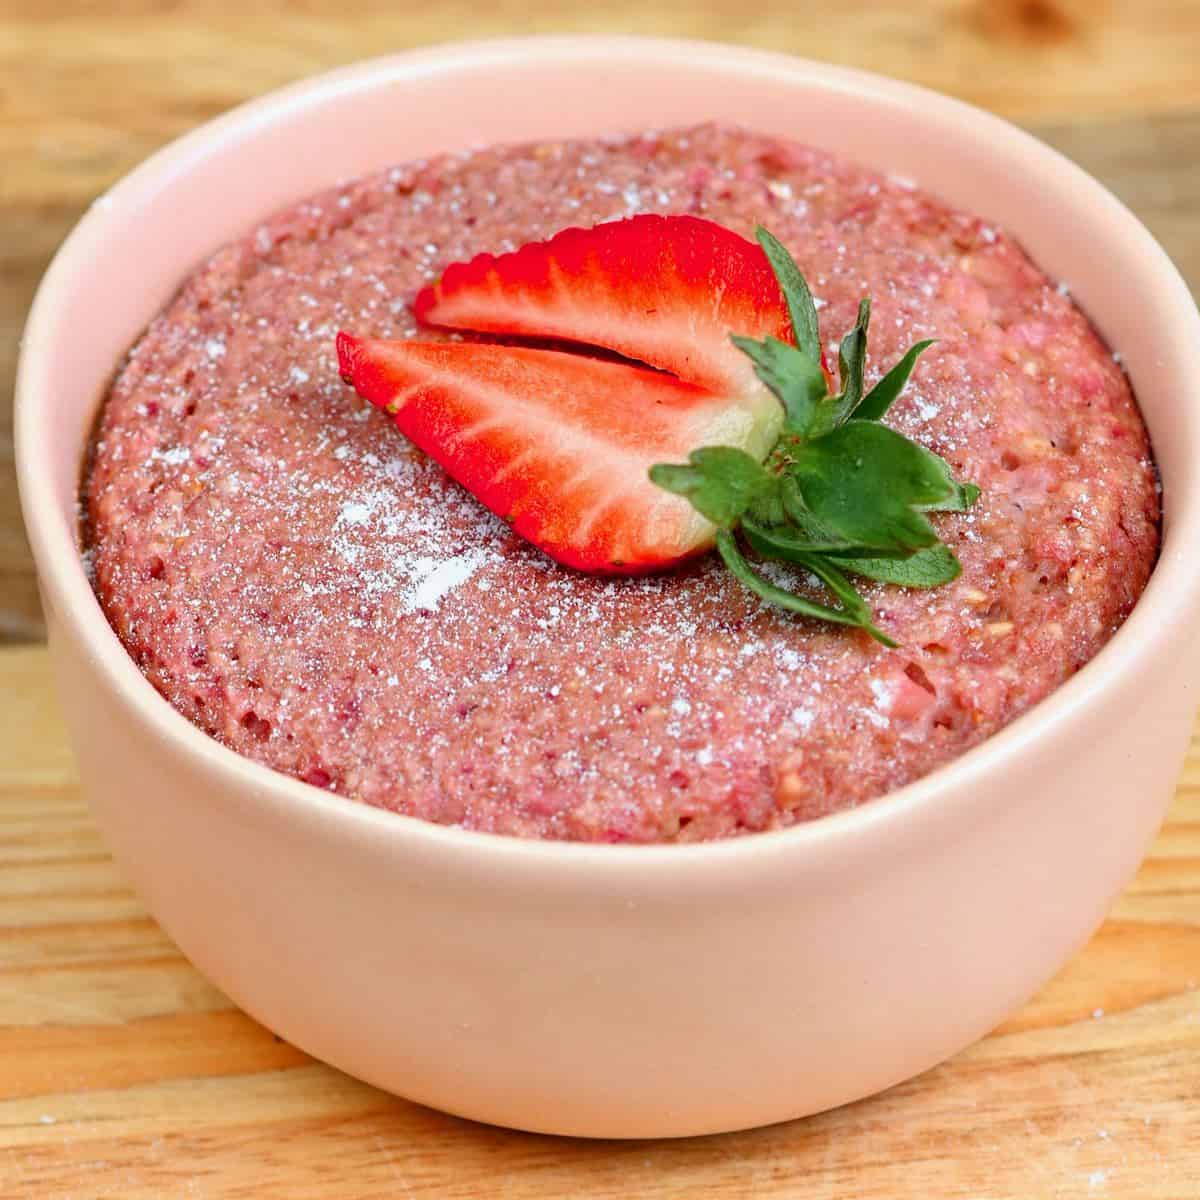 https://www.alphafoodie.com/wp-content/uploads/2021/03/Strawberry-Baked-Oats-1-of-1.jpeg